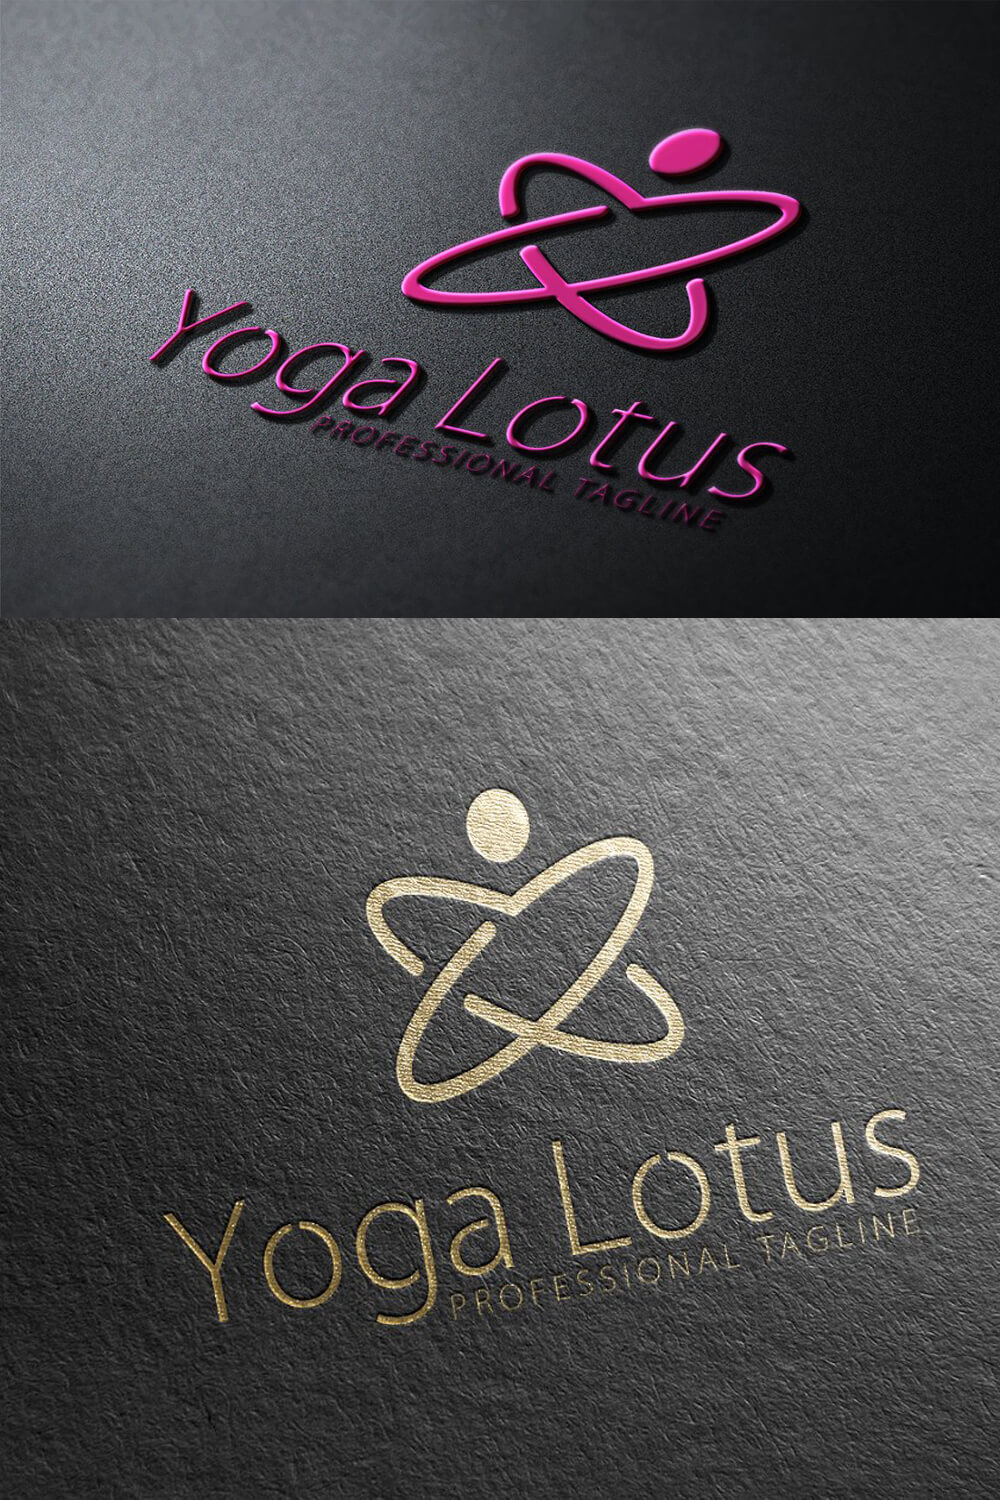 The inscription yoga lotus with a logo on black backgrounds with different textures.